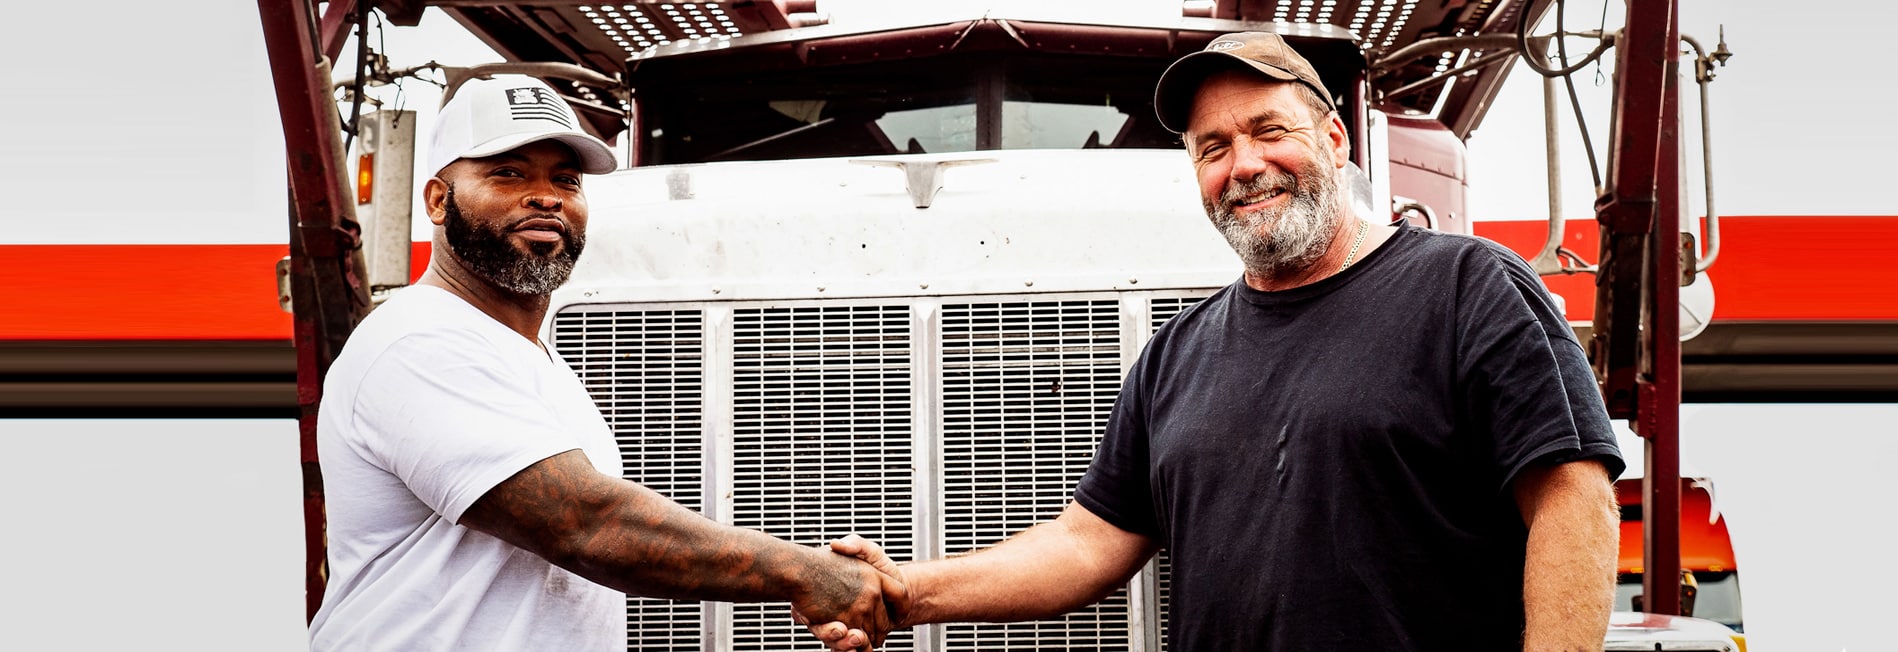 Even Amid a Soft Market, 93% of Truck Drivers Take Pride in Their Work